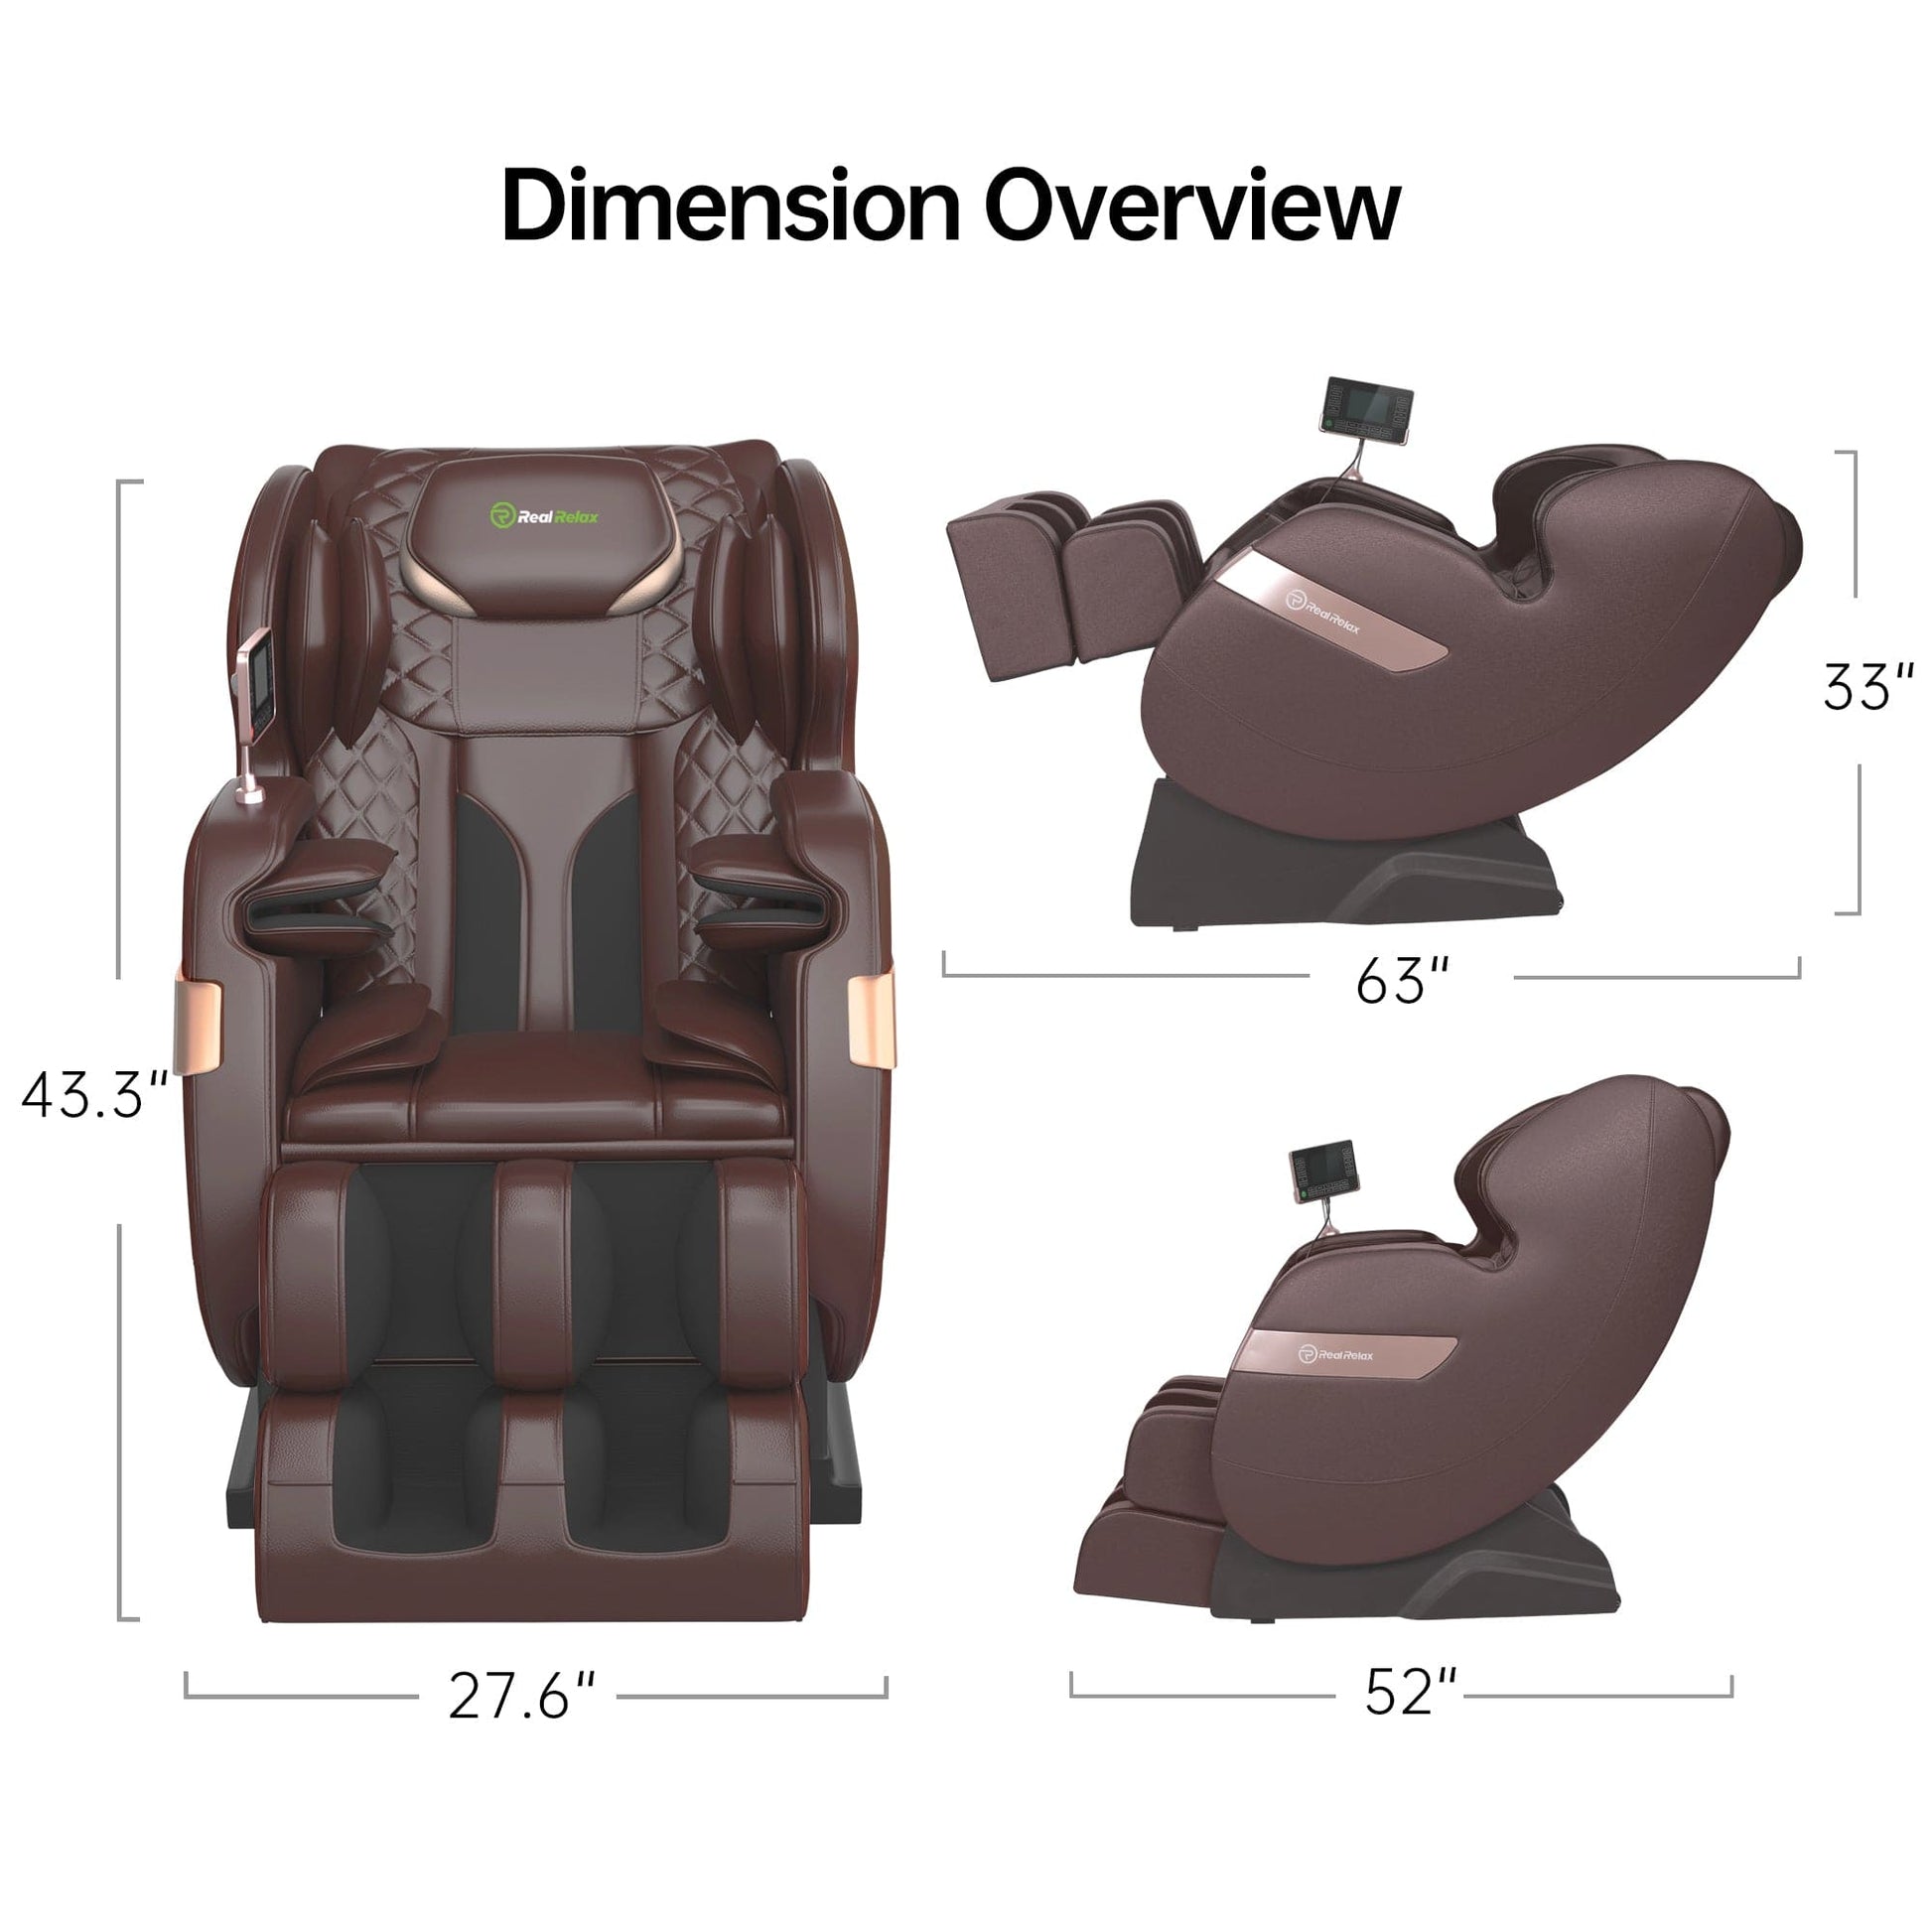 Real Relax notShow Favor-03 ADV Massage Chair Brown A